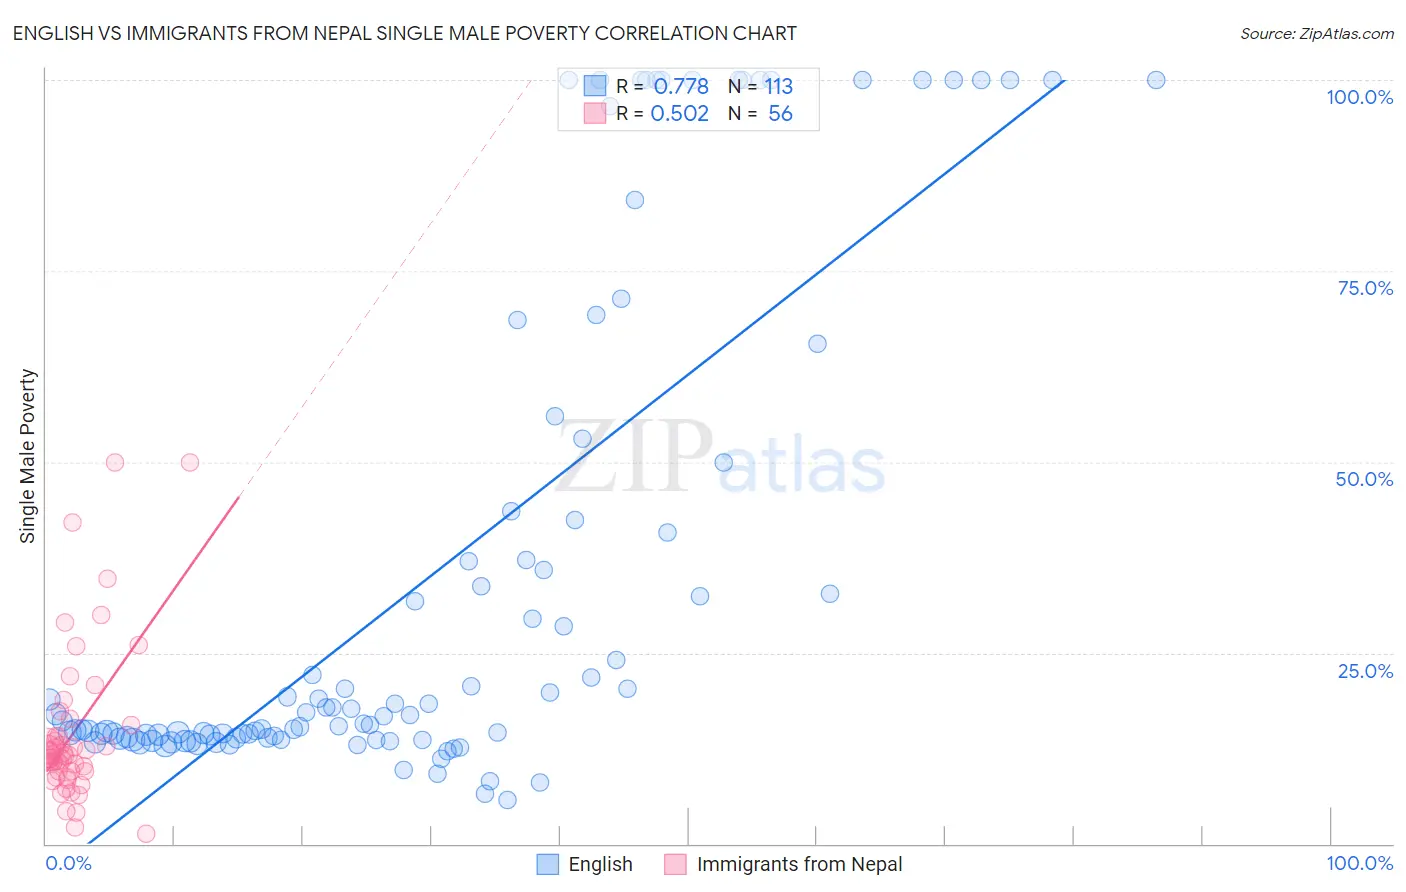 English vs Immigrants from Nepal Single Male Poverty